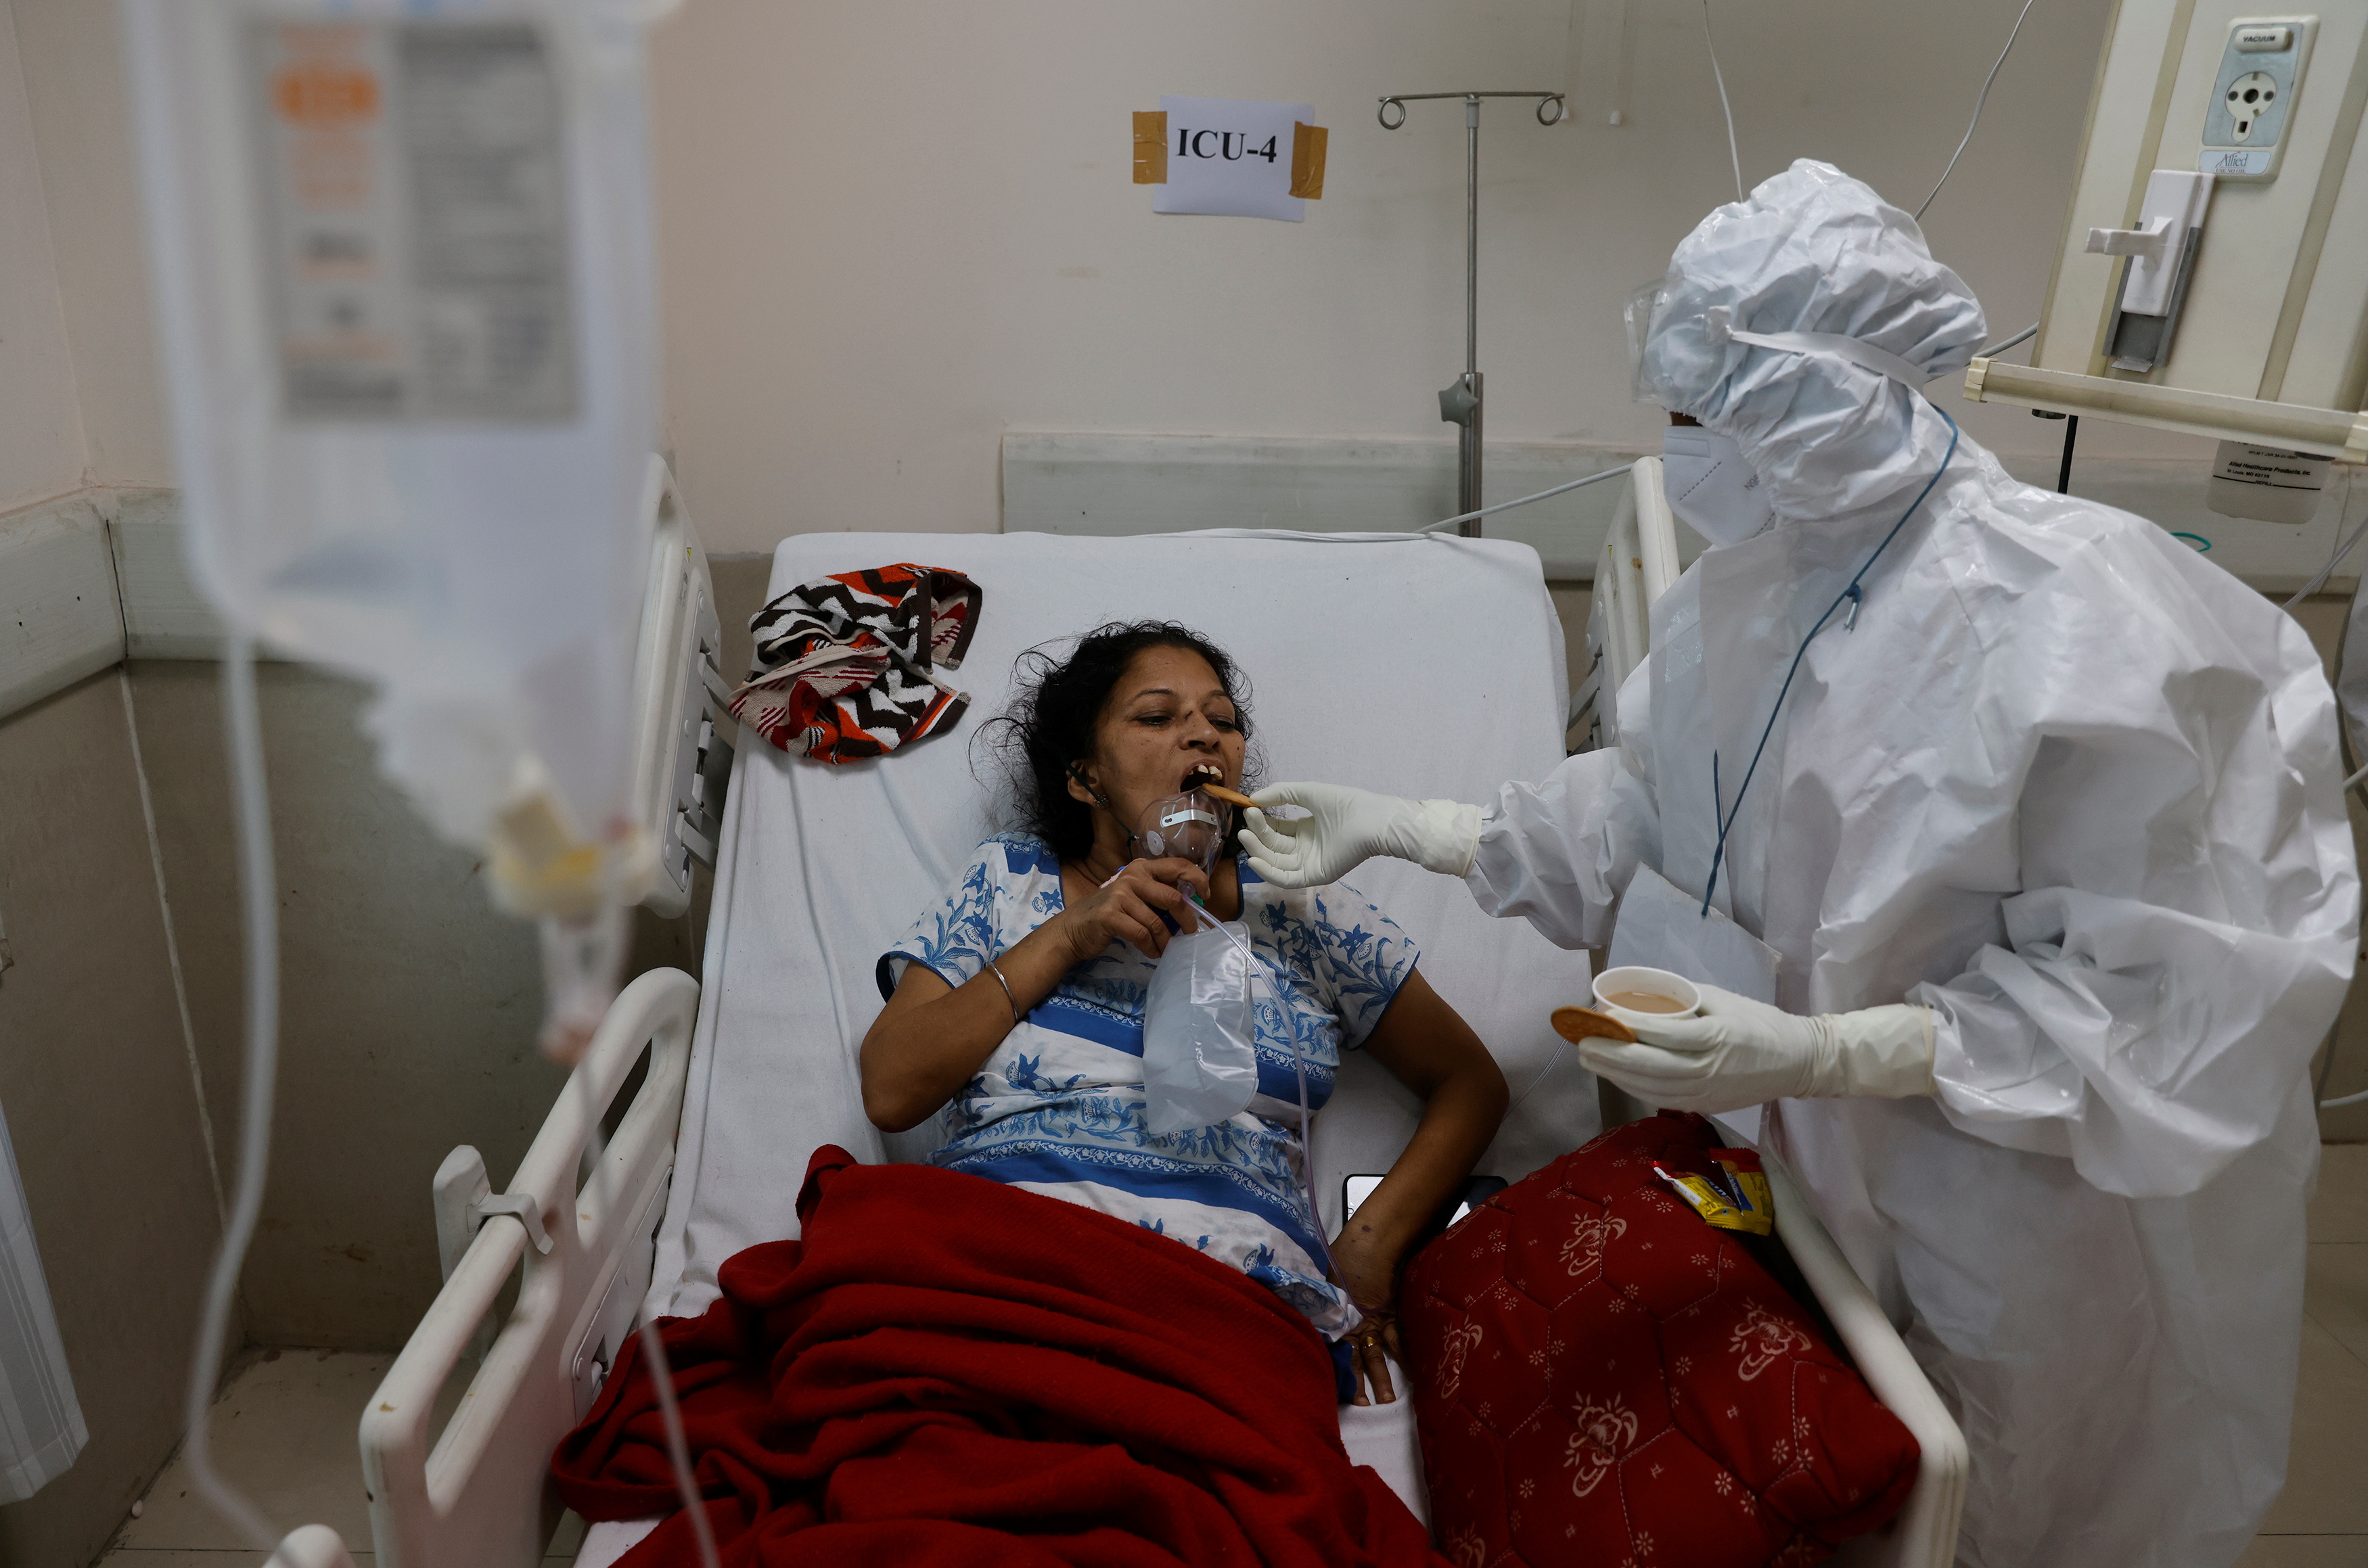 A medical worker feeds a patient suffering from the coronavirus disease (COVID-19), inside the Intensive Care Unit (ICU) ward at the Government Institute of Medical Sciences (GIMS) hospital, in Greater Noida on the outskirts of New Delhi, India, May 21, 2021. REUTERS/Adnan Abidi